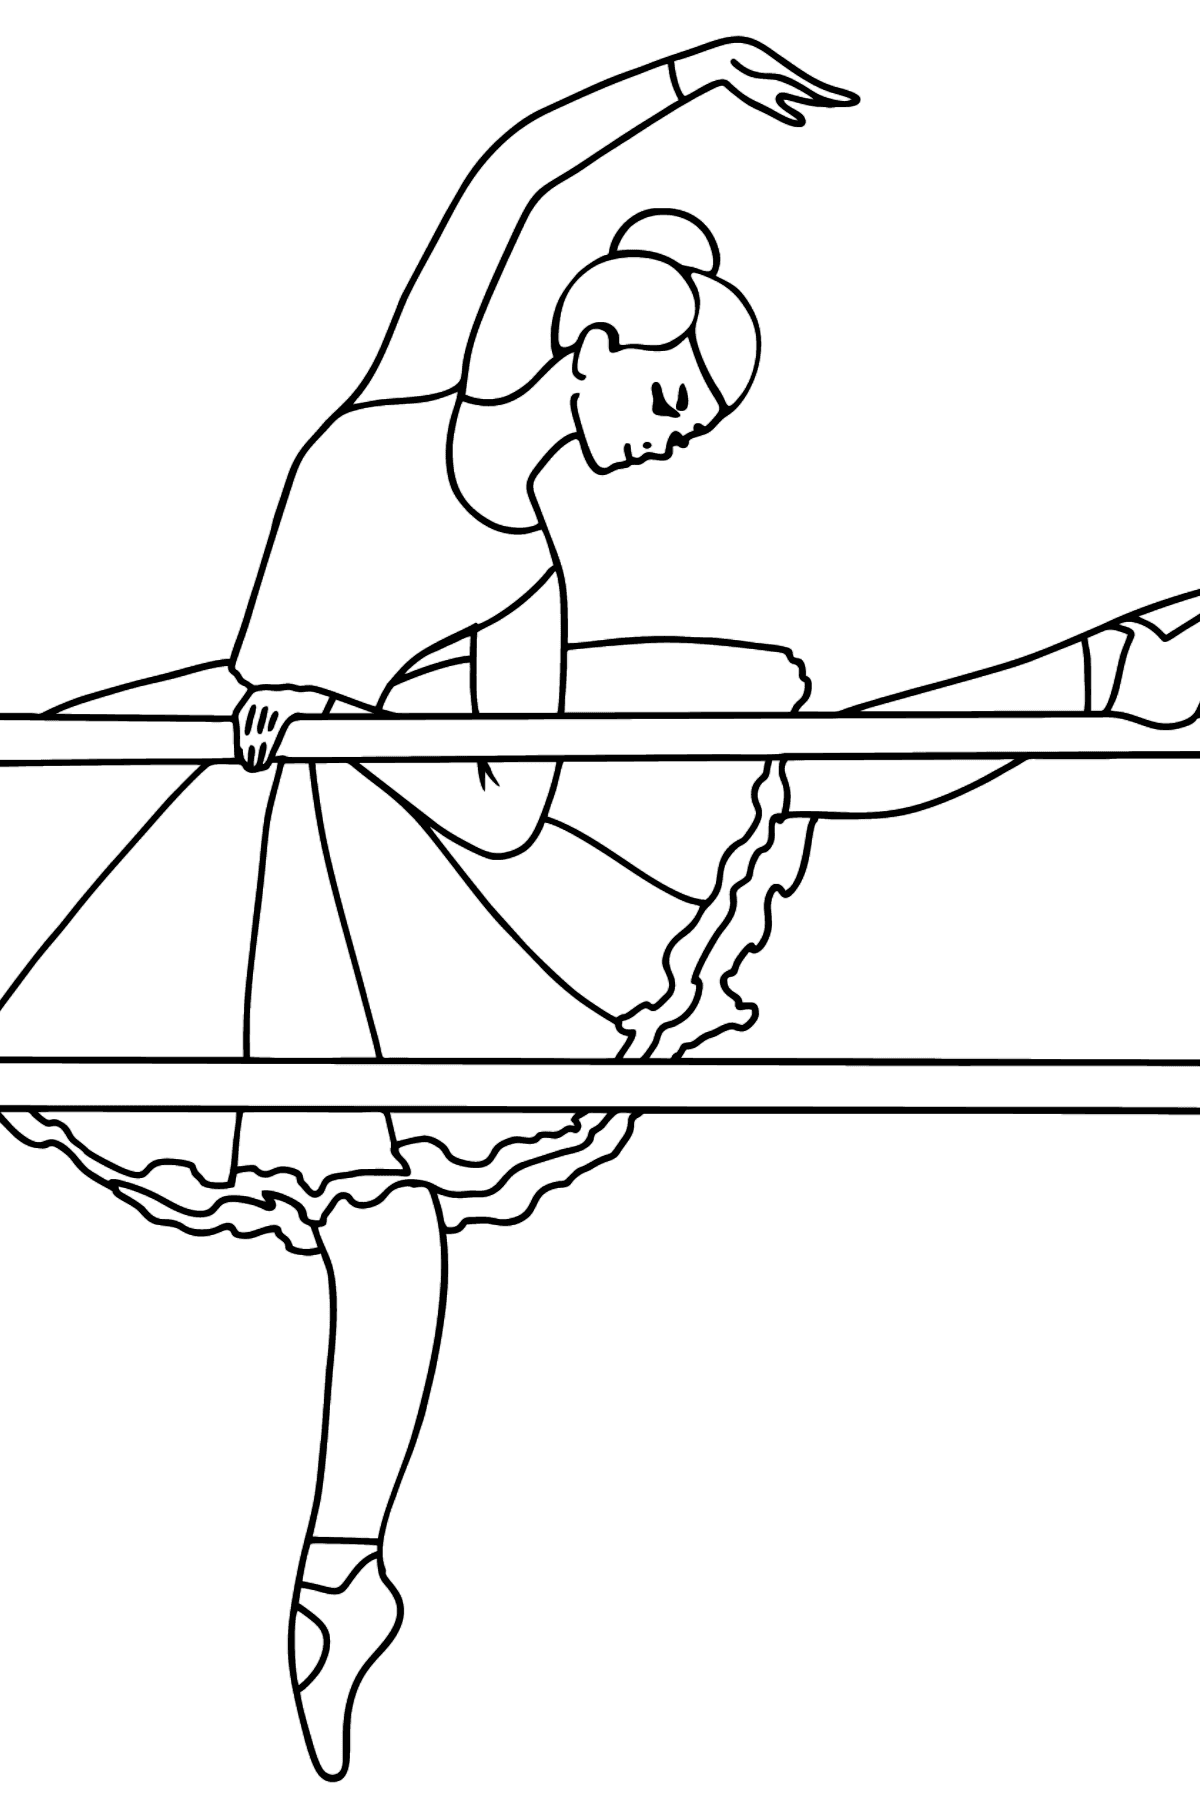 Coloring page - ballerina at the rehearsal - Coloring Pages for Kids